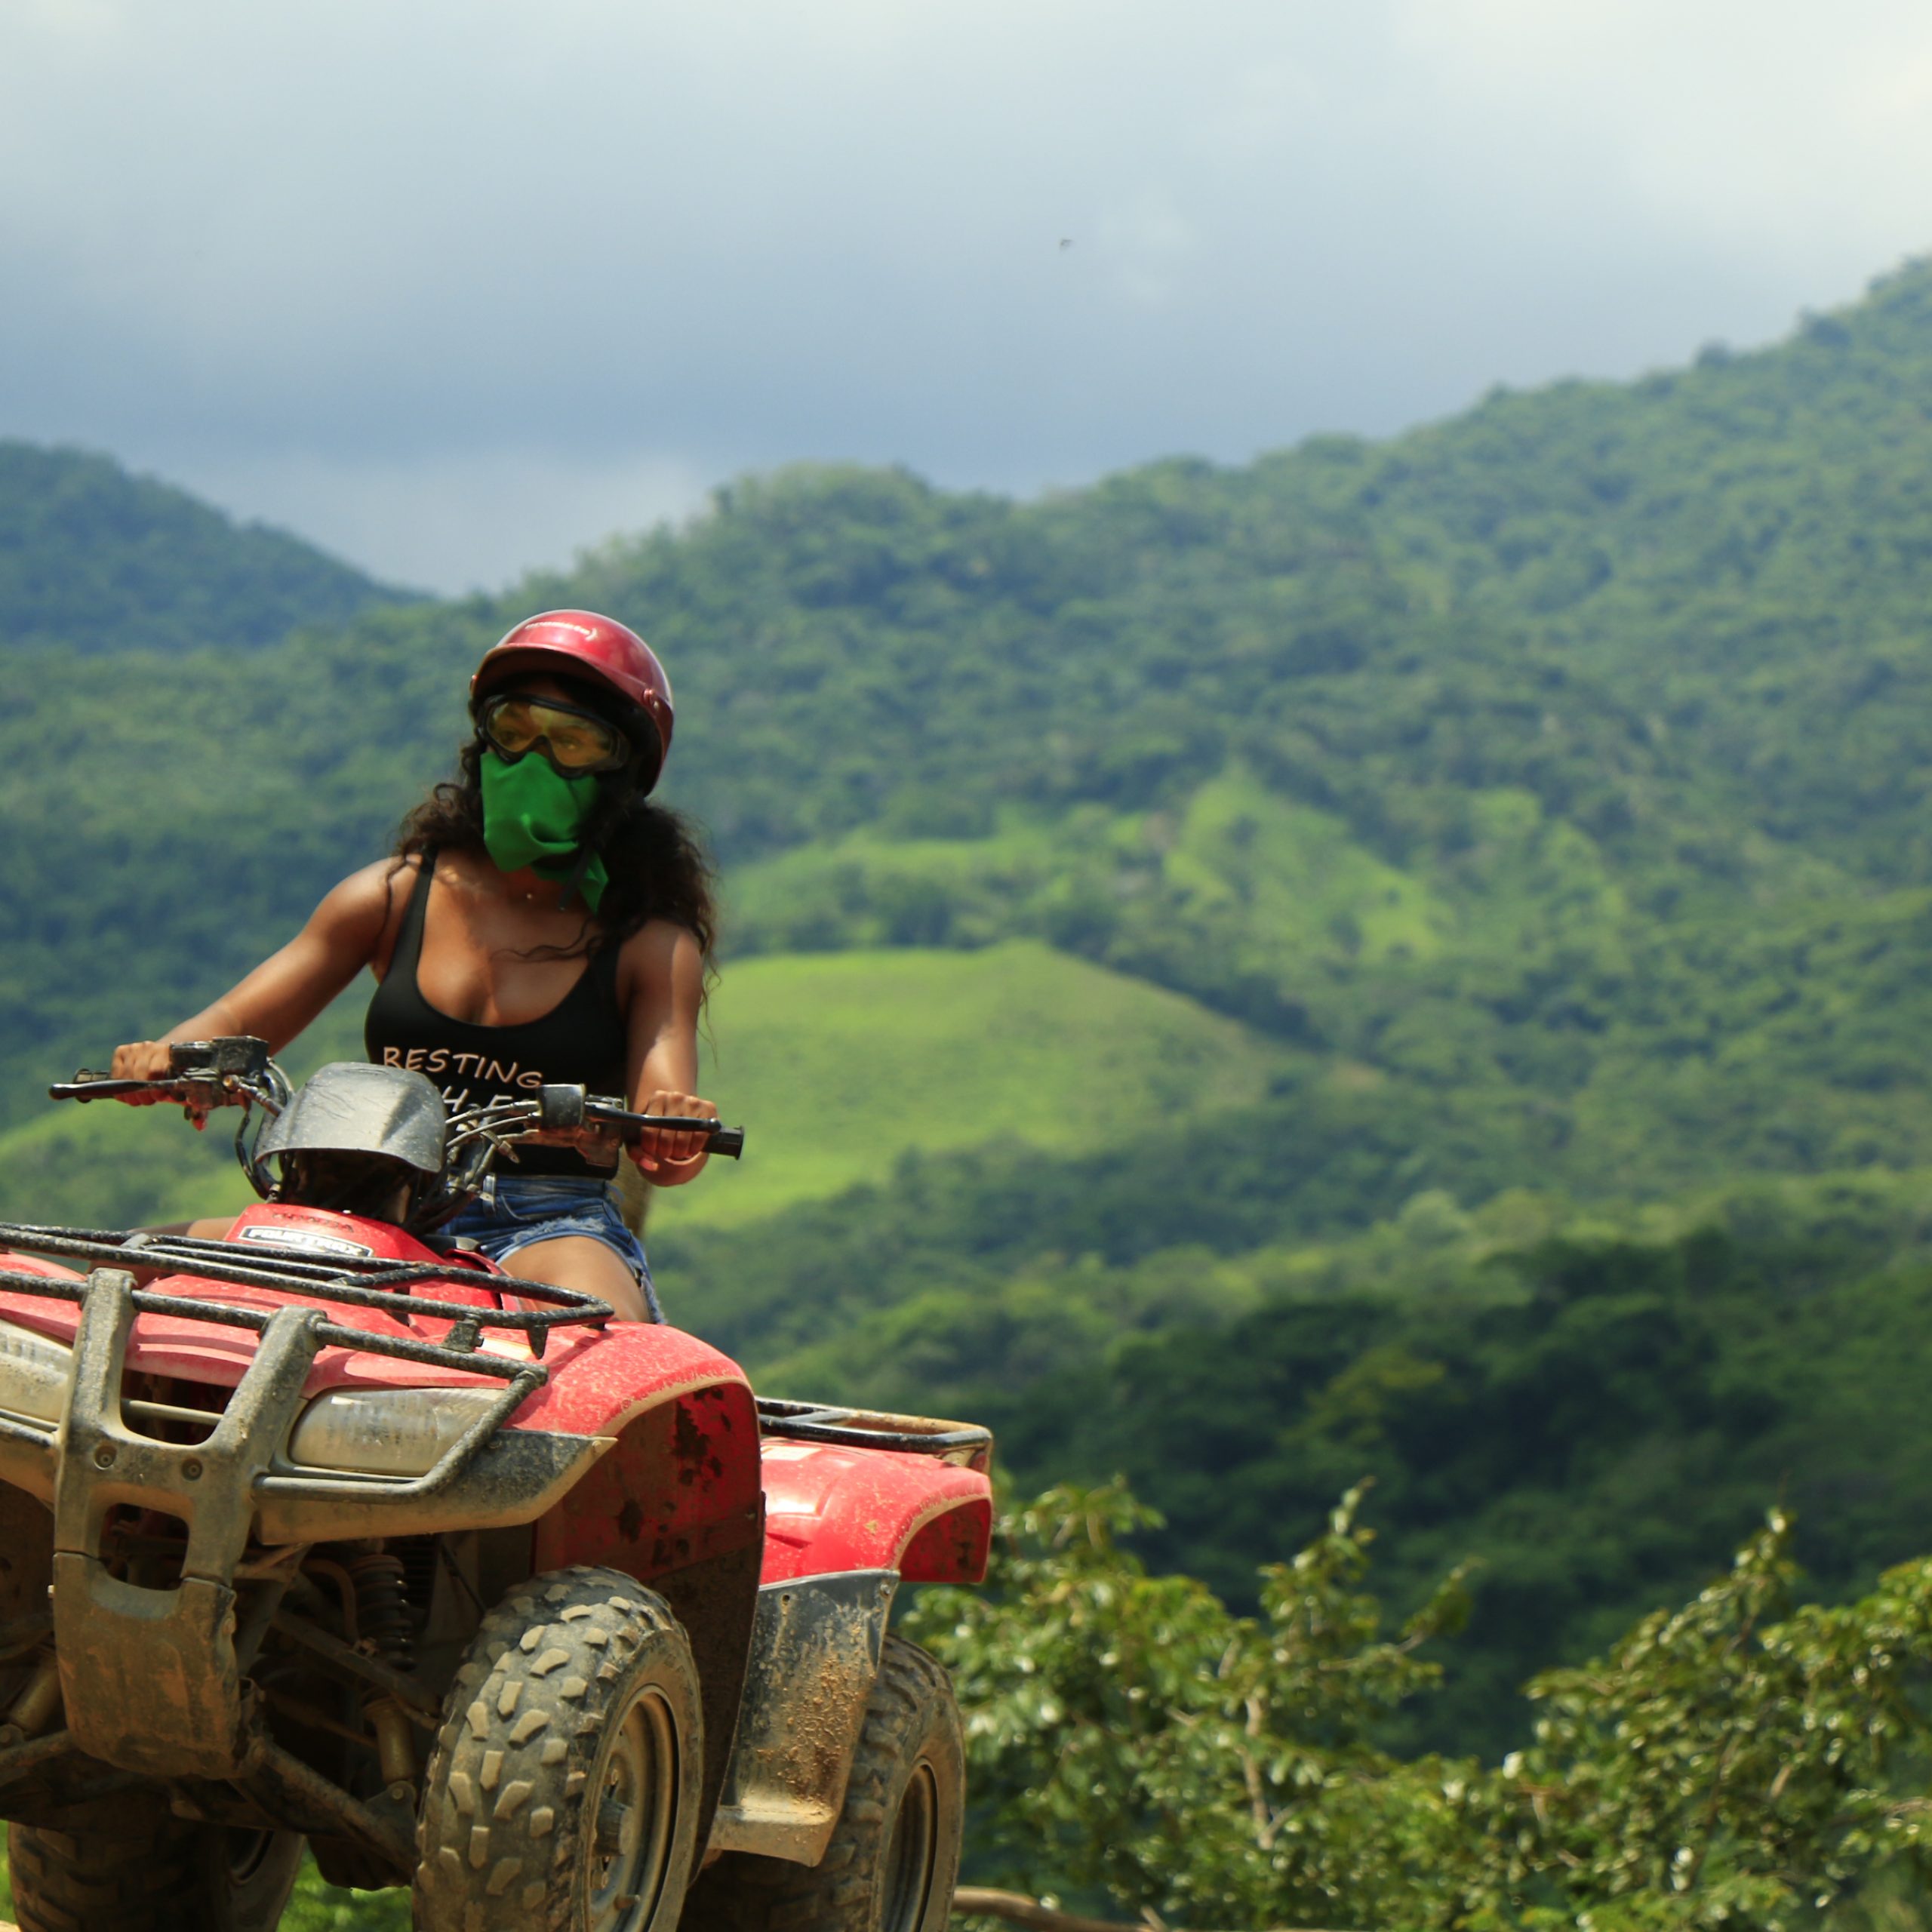 Now you are using the ziplines among the jungle and riding the ATV.